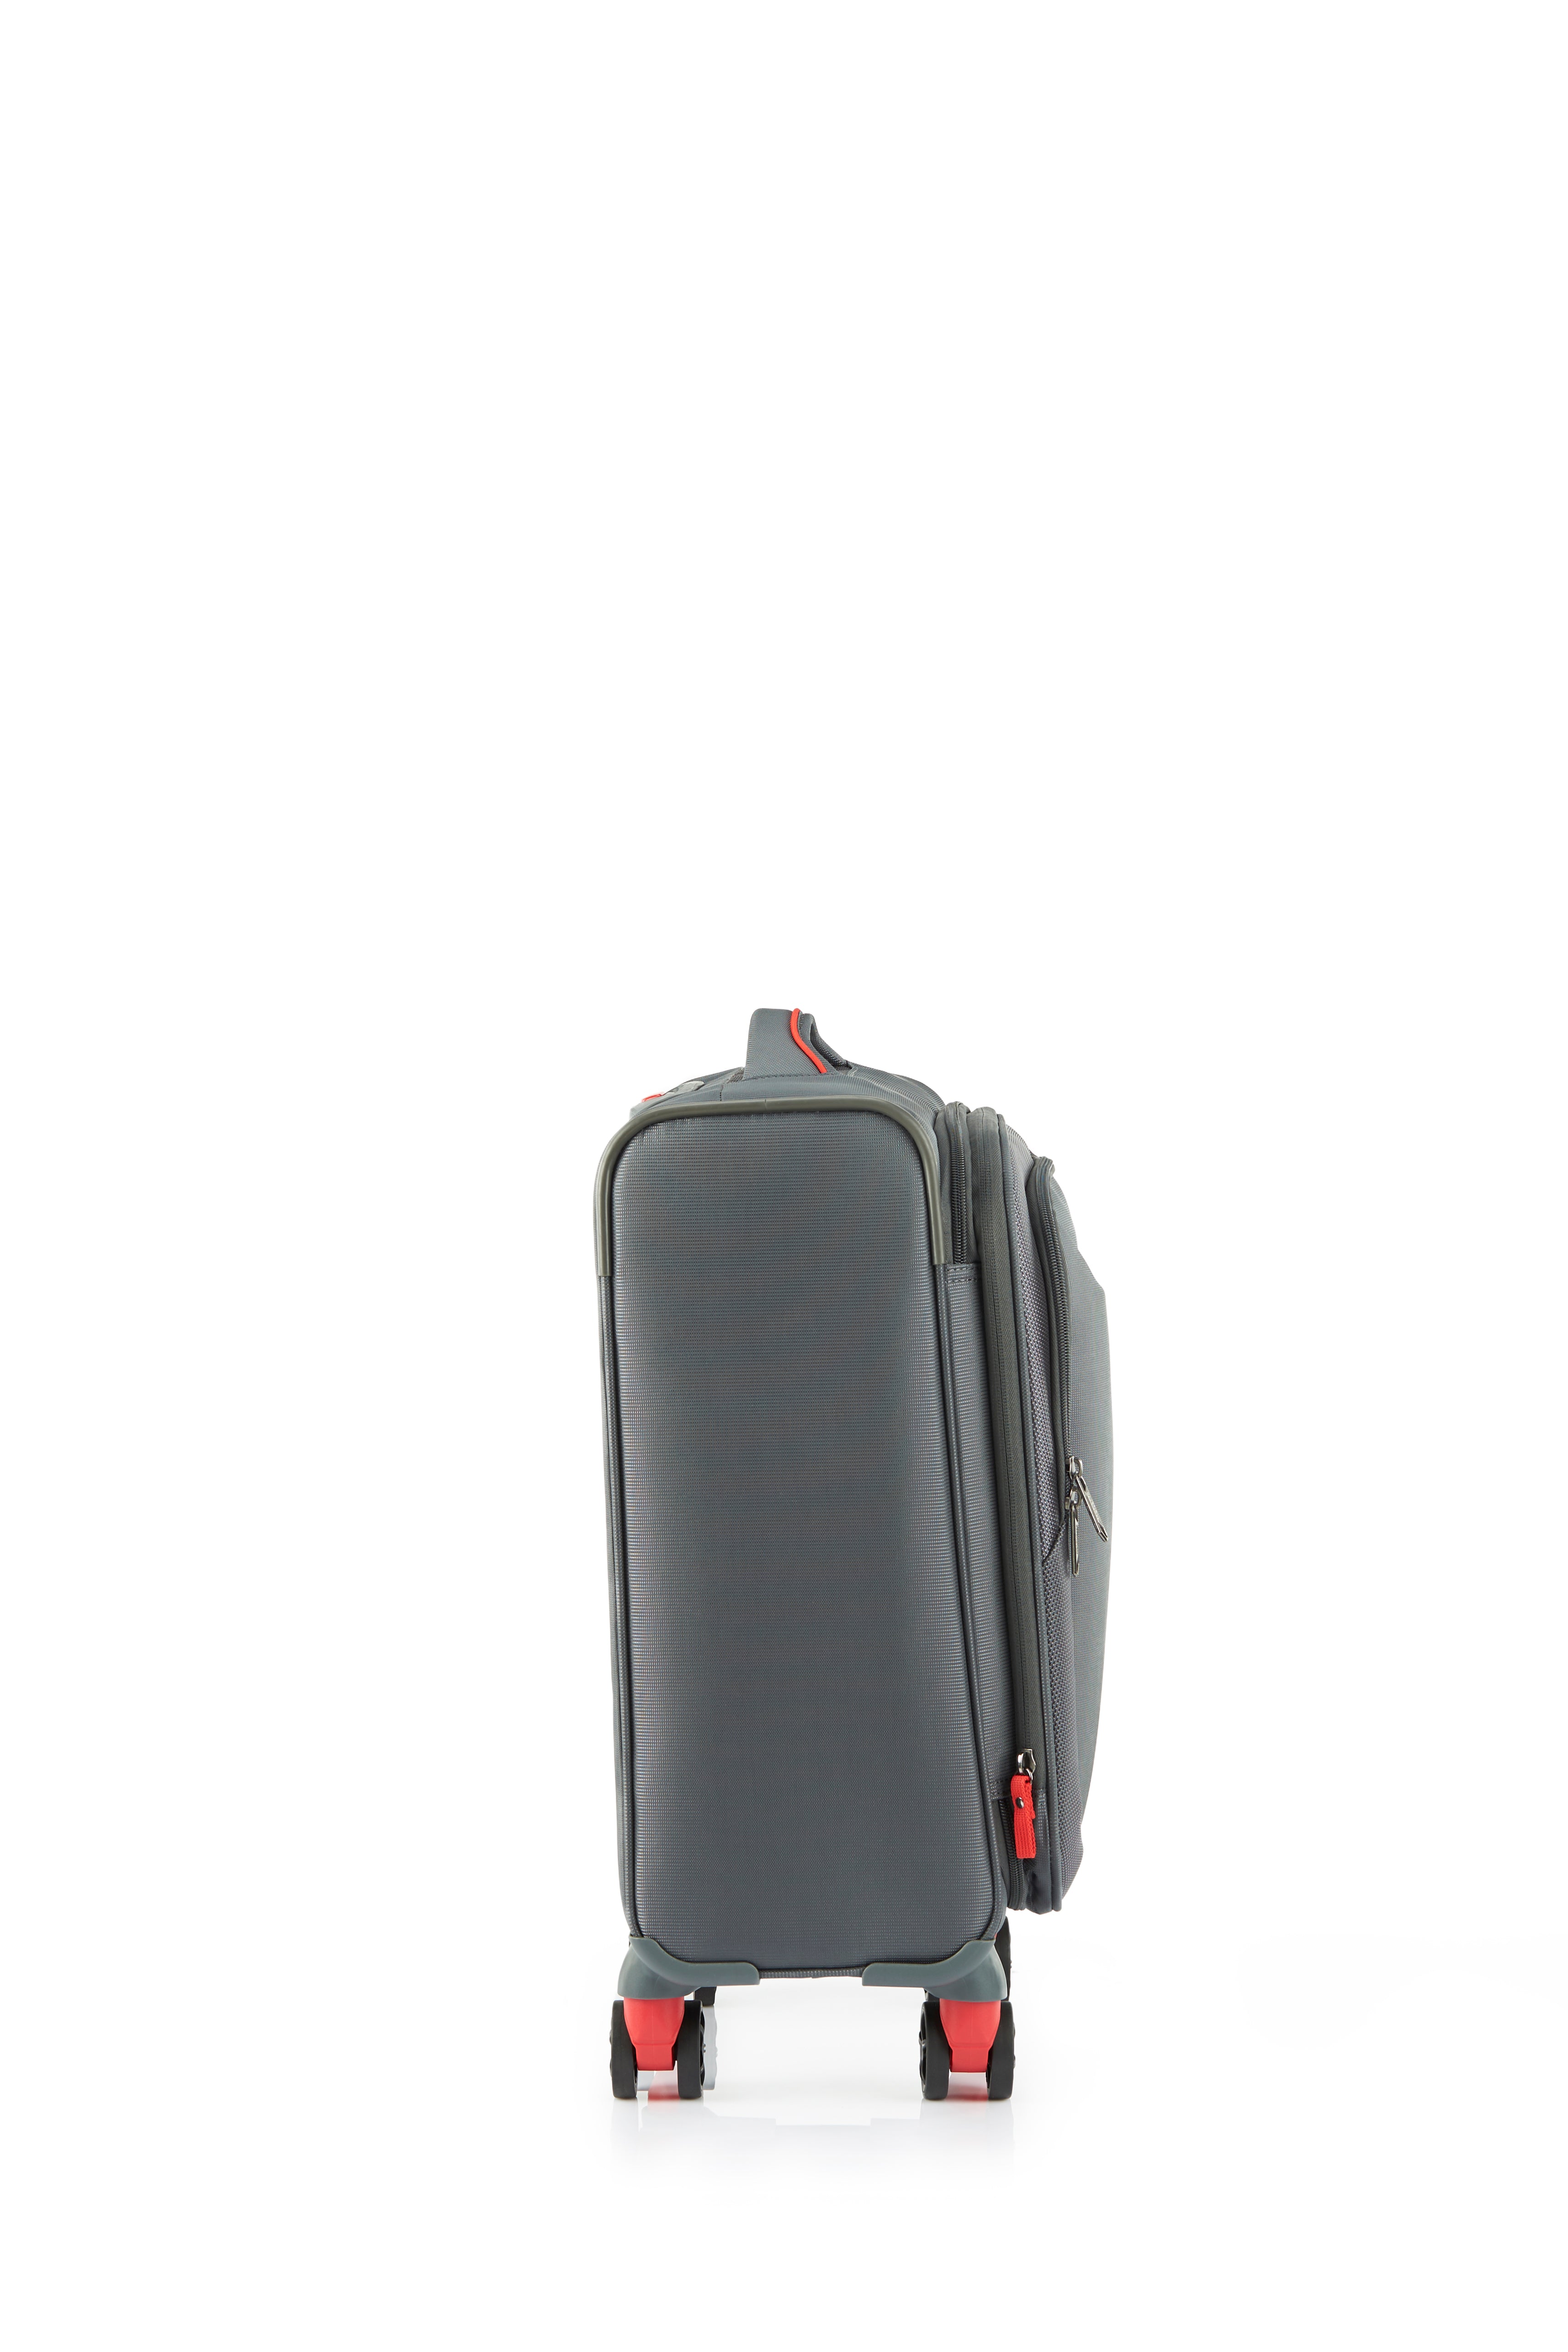 American Tourister - Applite ECO 55cm Small Suitcase - Grey/Red-3